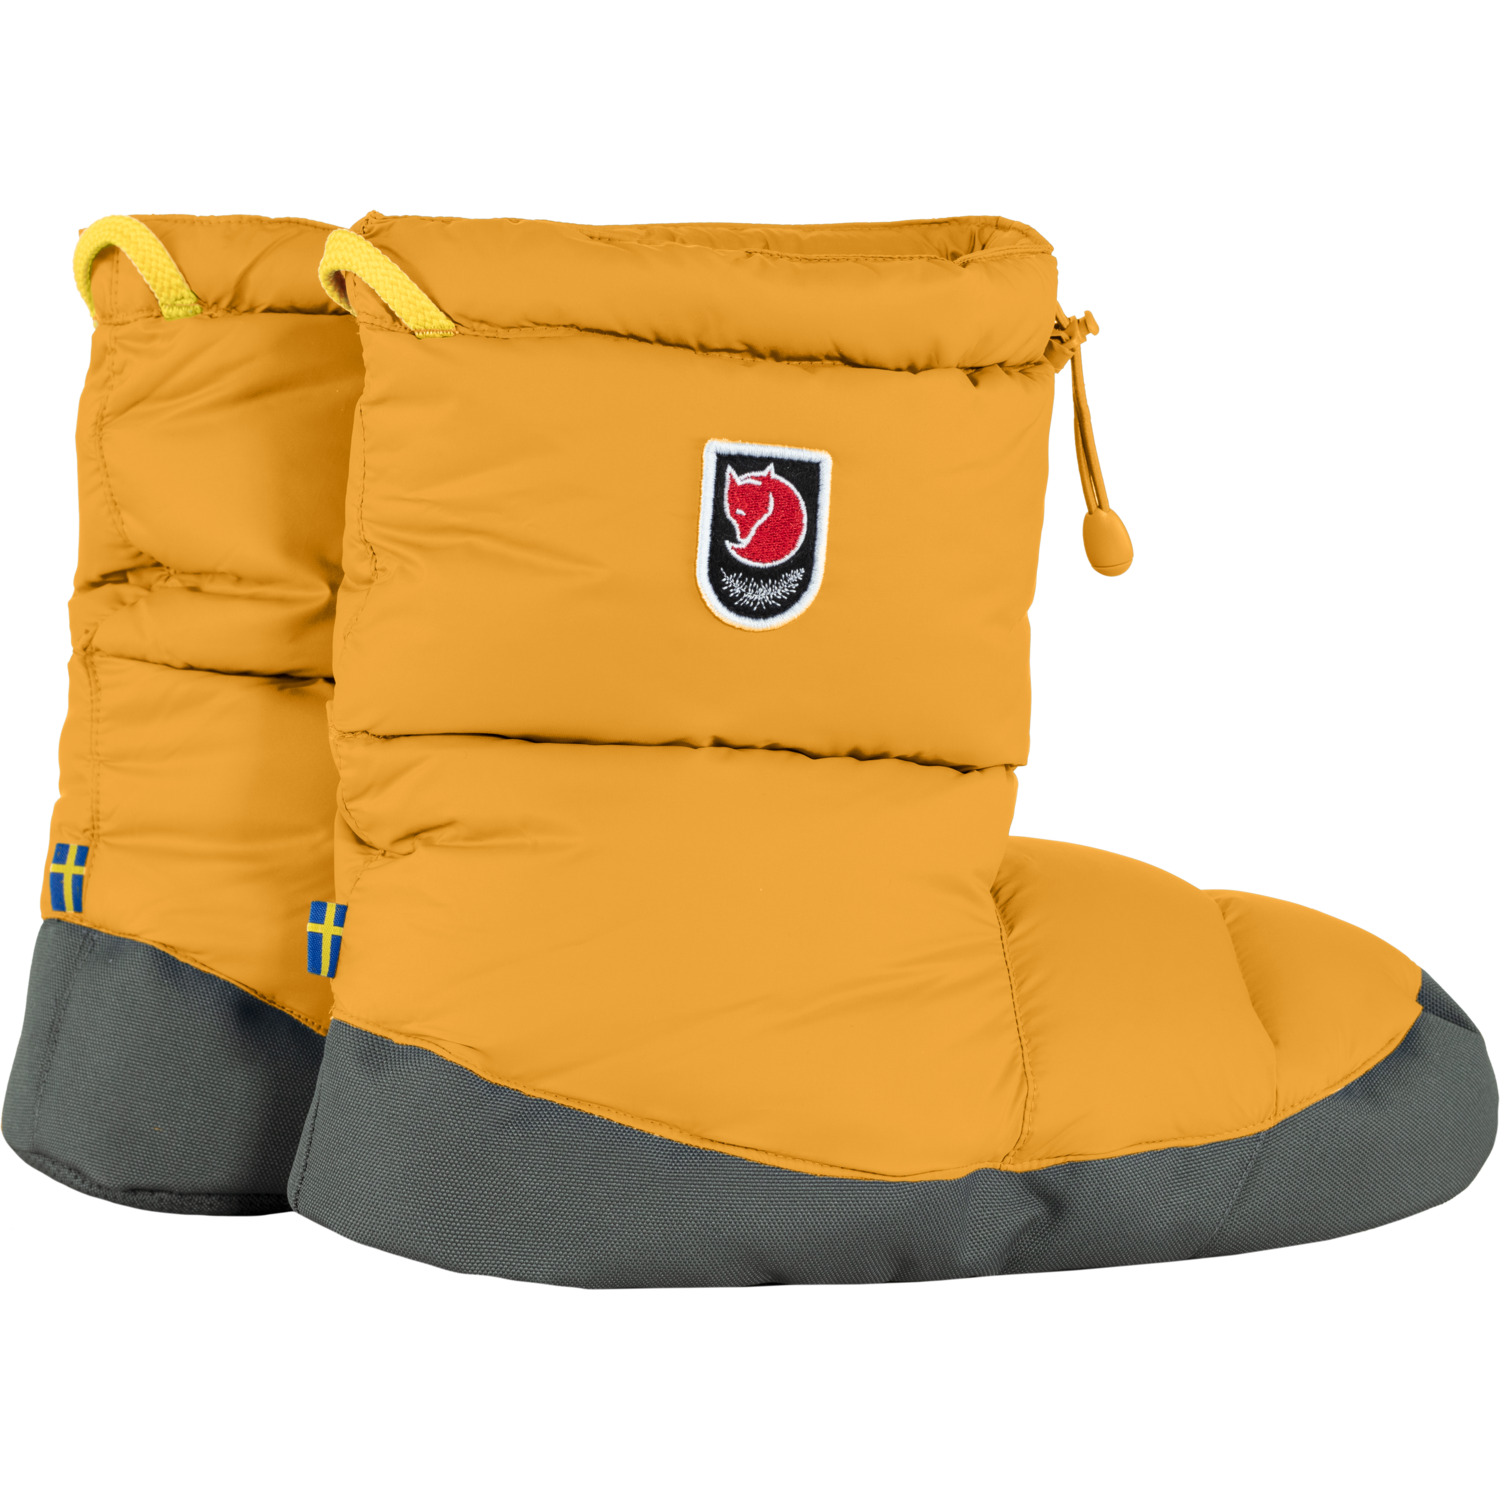 Expedition_Down_Booties_90662-161_B_MAIN_FJR.png